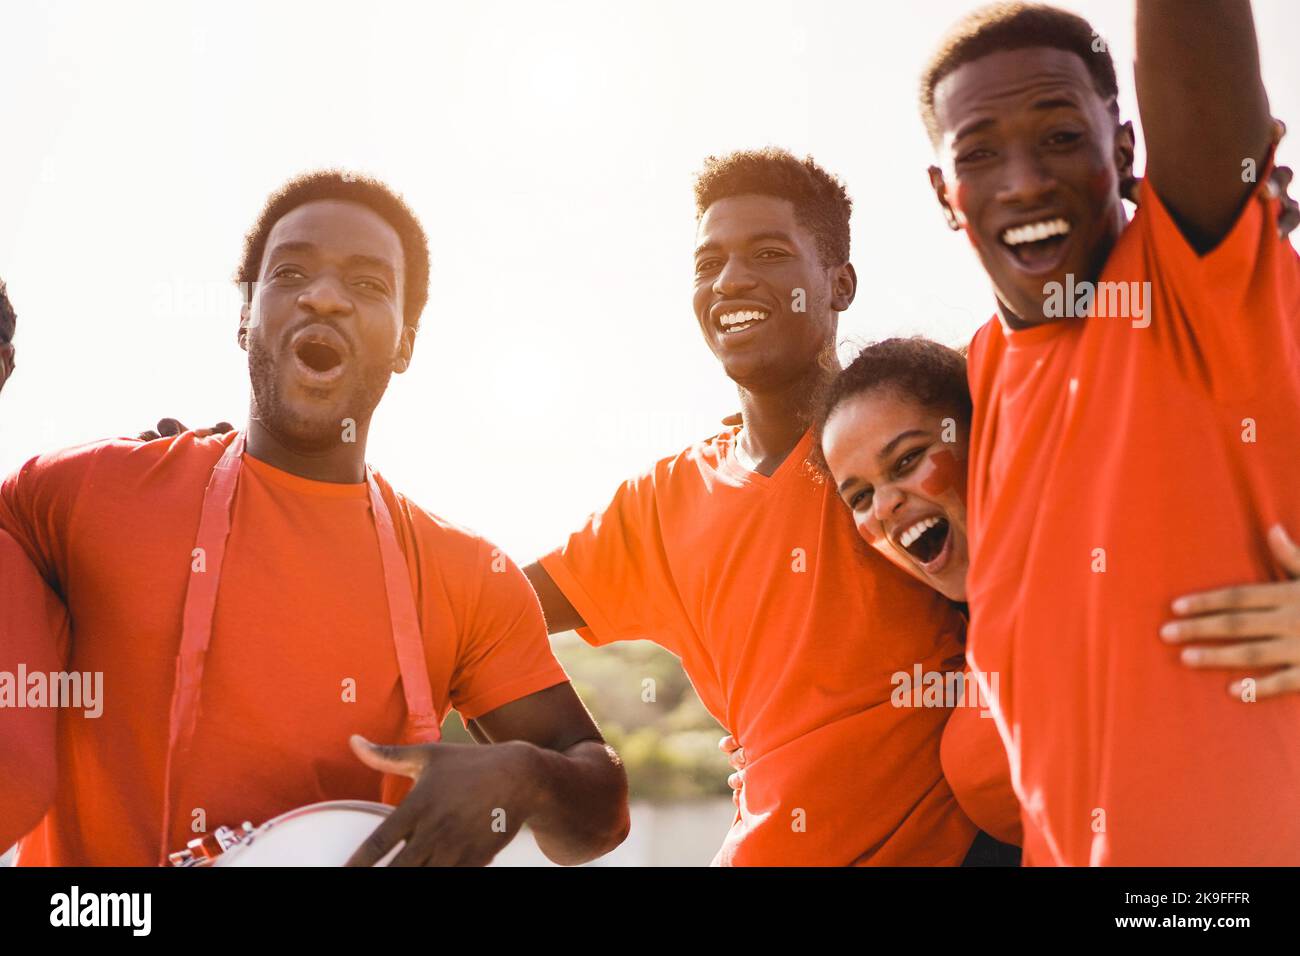 Orange sport fans screaming while supporting their team - Football supporters having fun at competition event - Soft focus on center guy face Stock Photo